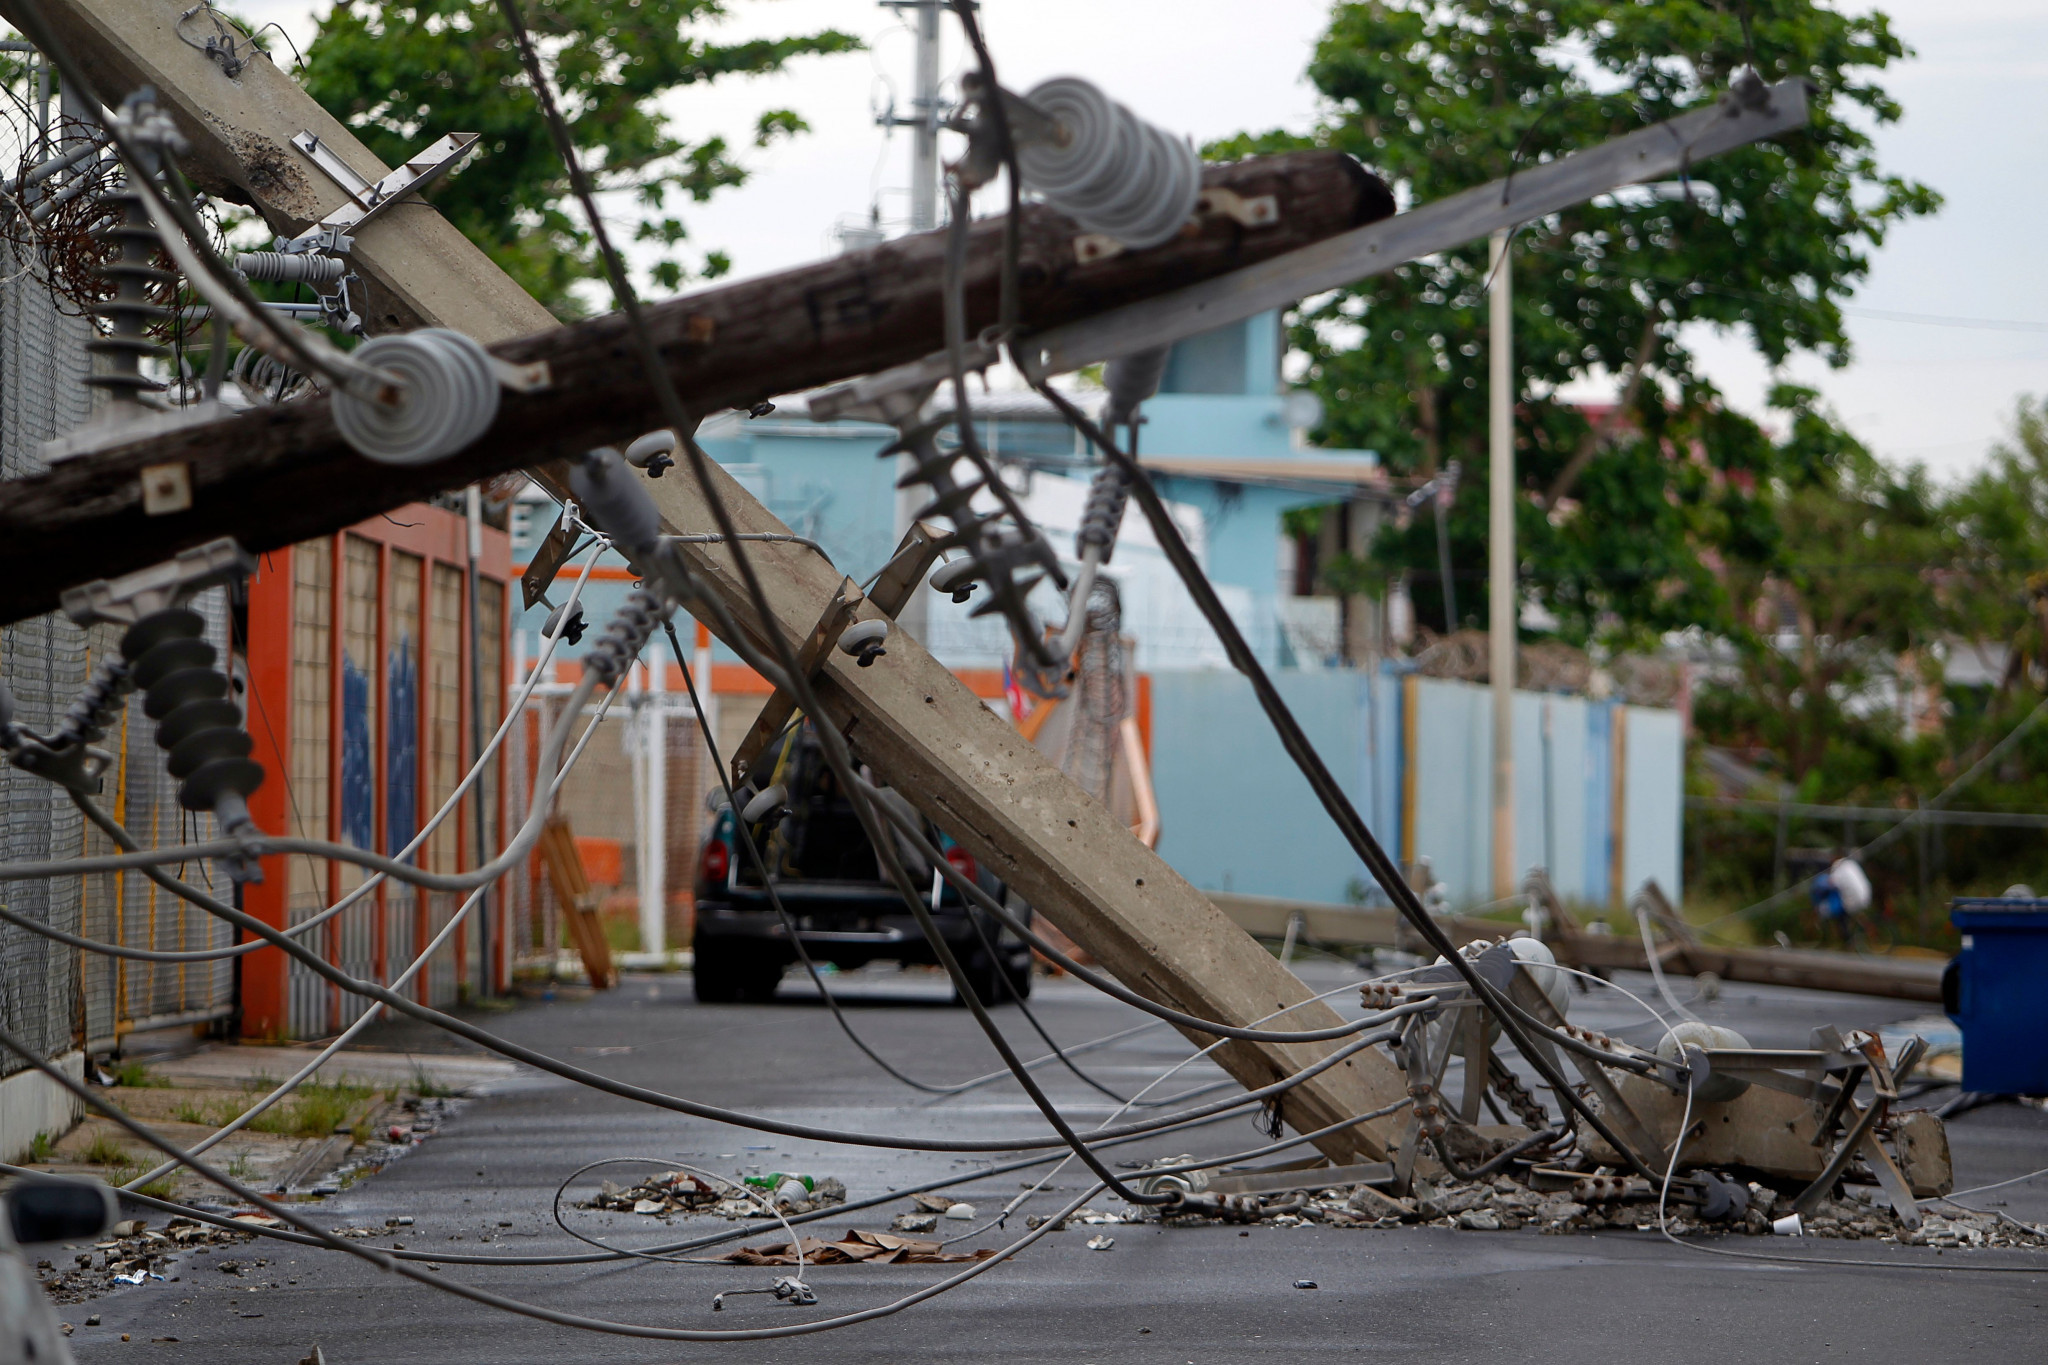 Hurriance Maria caused tremendous damage in Puerto Rico ©Getty Images